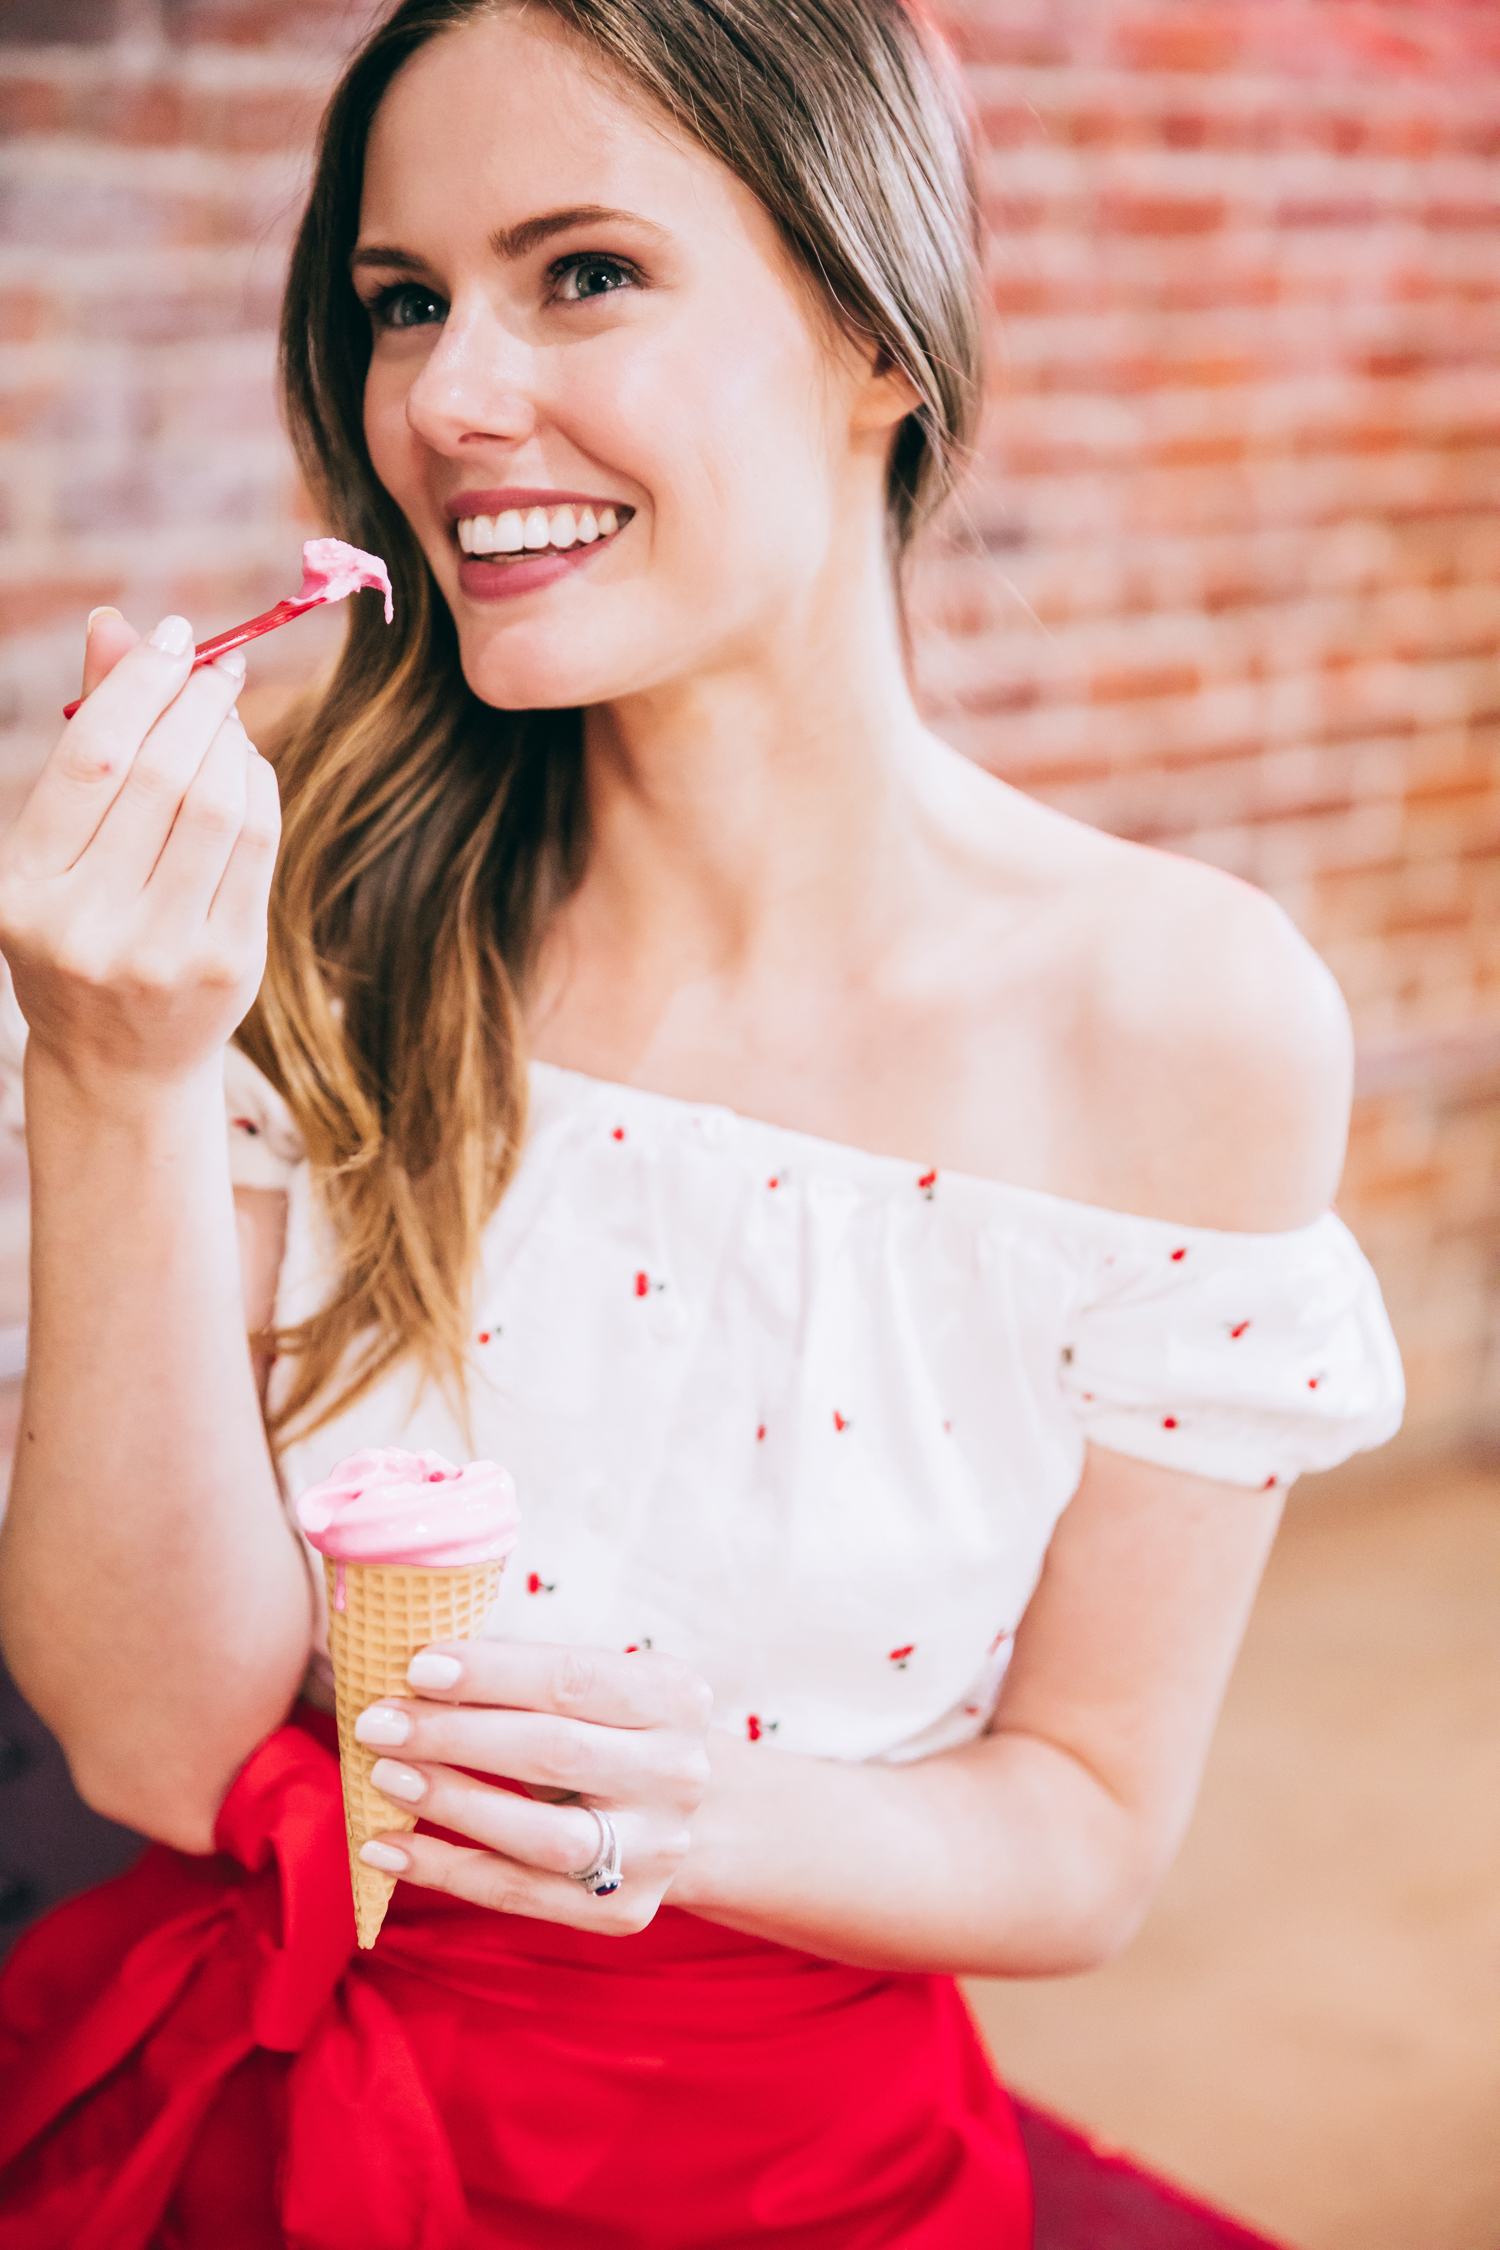 Alyssa Campanella of The A List blog shares 20 Questions With Alyssa at the Museum of Ice Cream